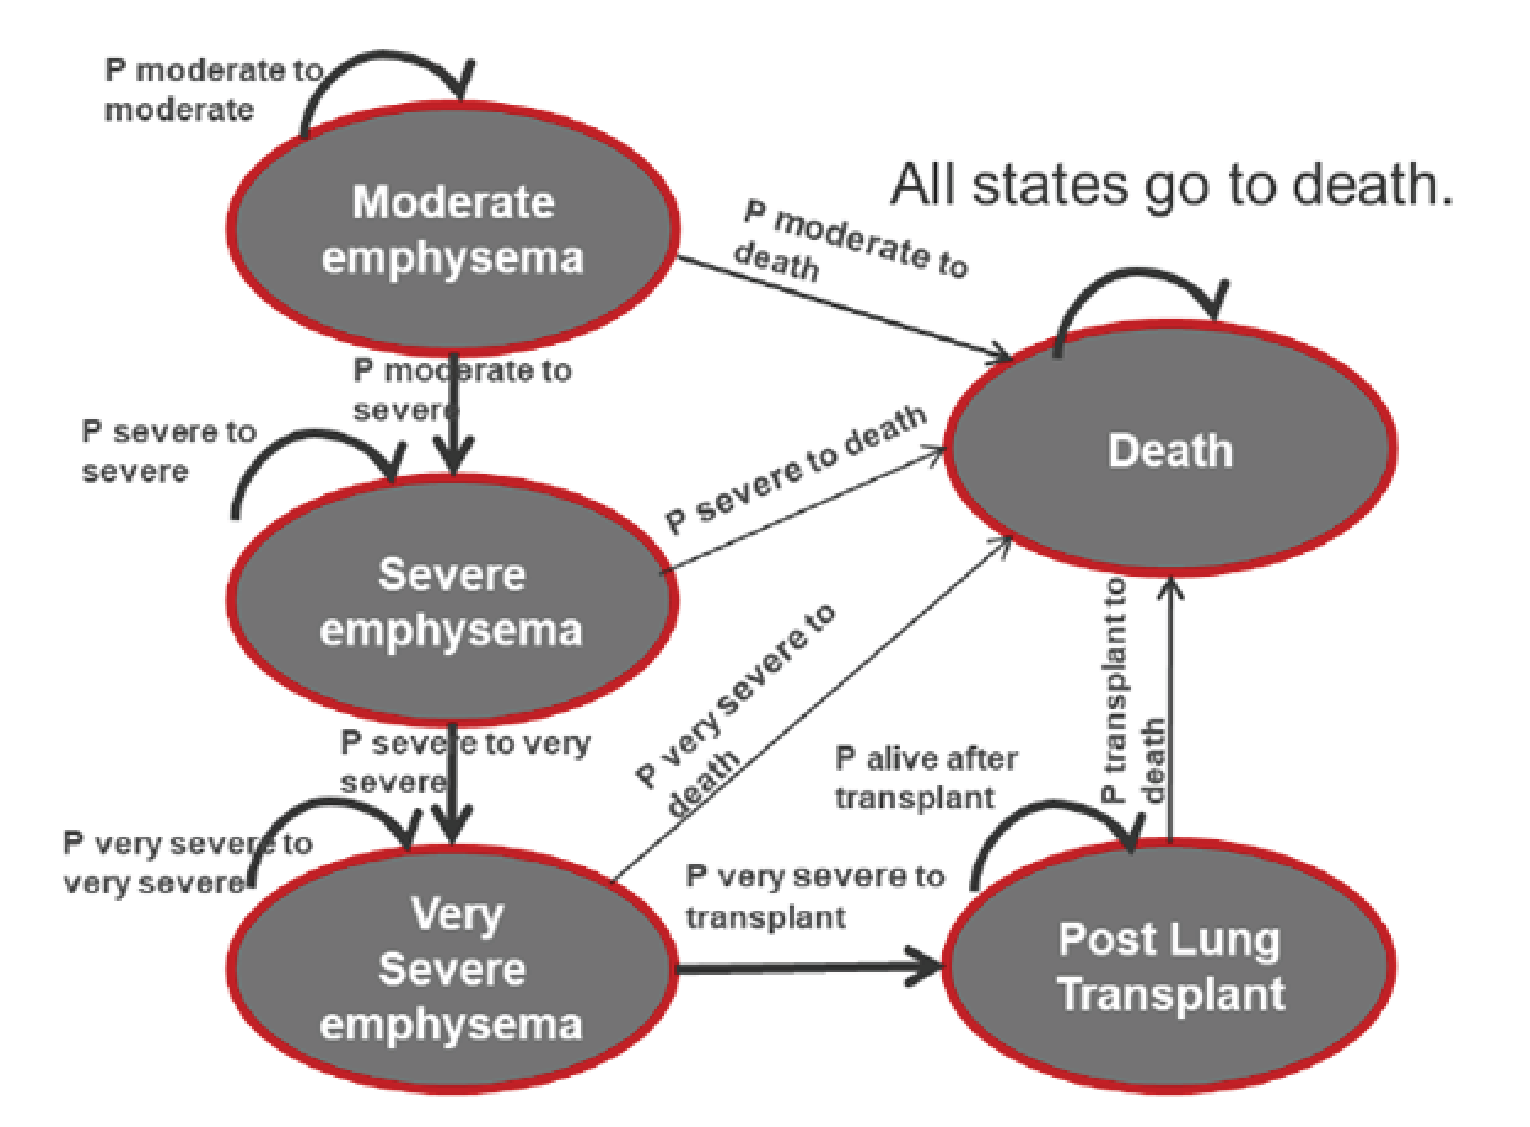 Figure 1 depicts the sponsor’s Markov model structure. Patients begin in the moderate emphysema health state, after which they progress to severe emphysema, very severe emphysema, post lung transplant, or death state. In each health state, patients could either progress to the next state, remain in their current state, or move to the death state.